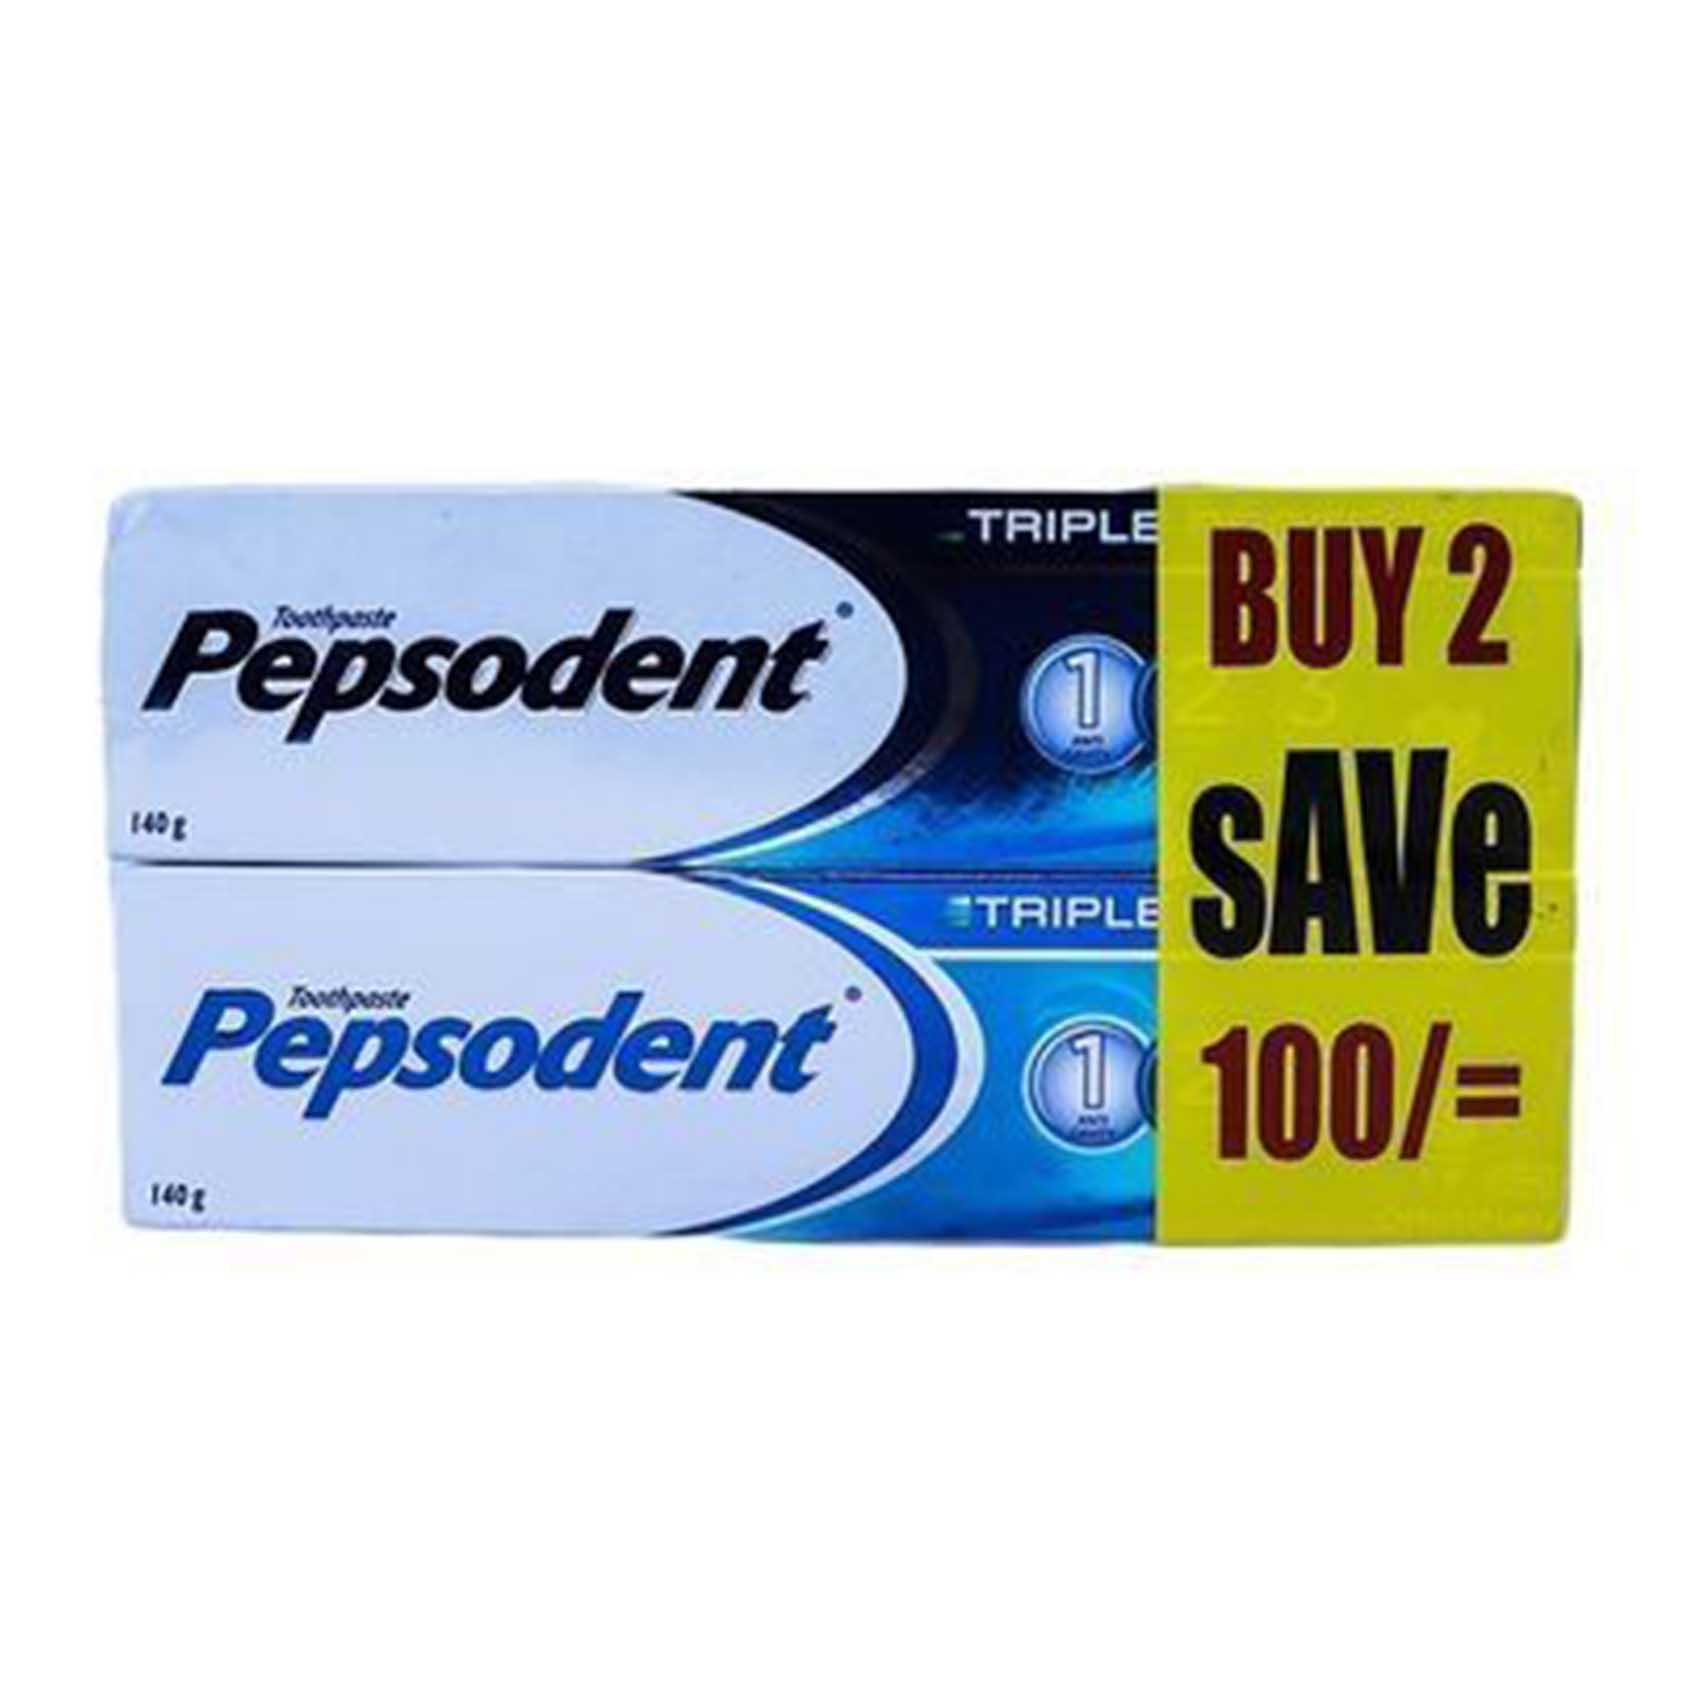 Pepsodent Toothpaste 140G Promo Pack